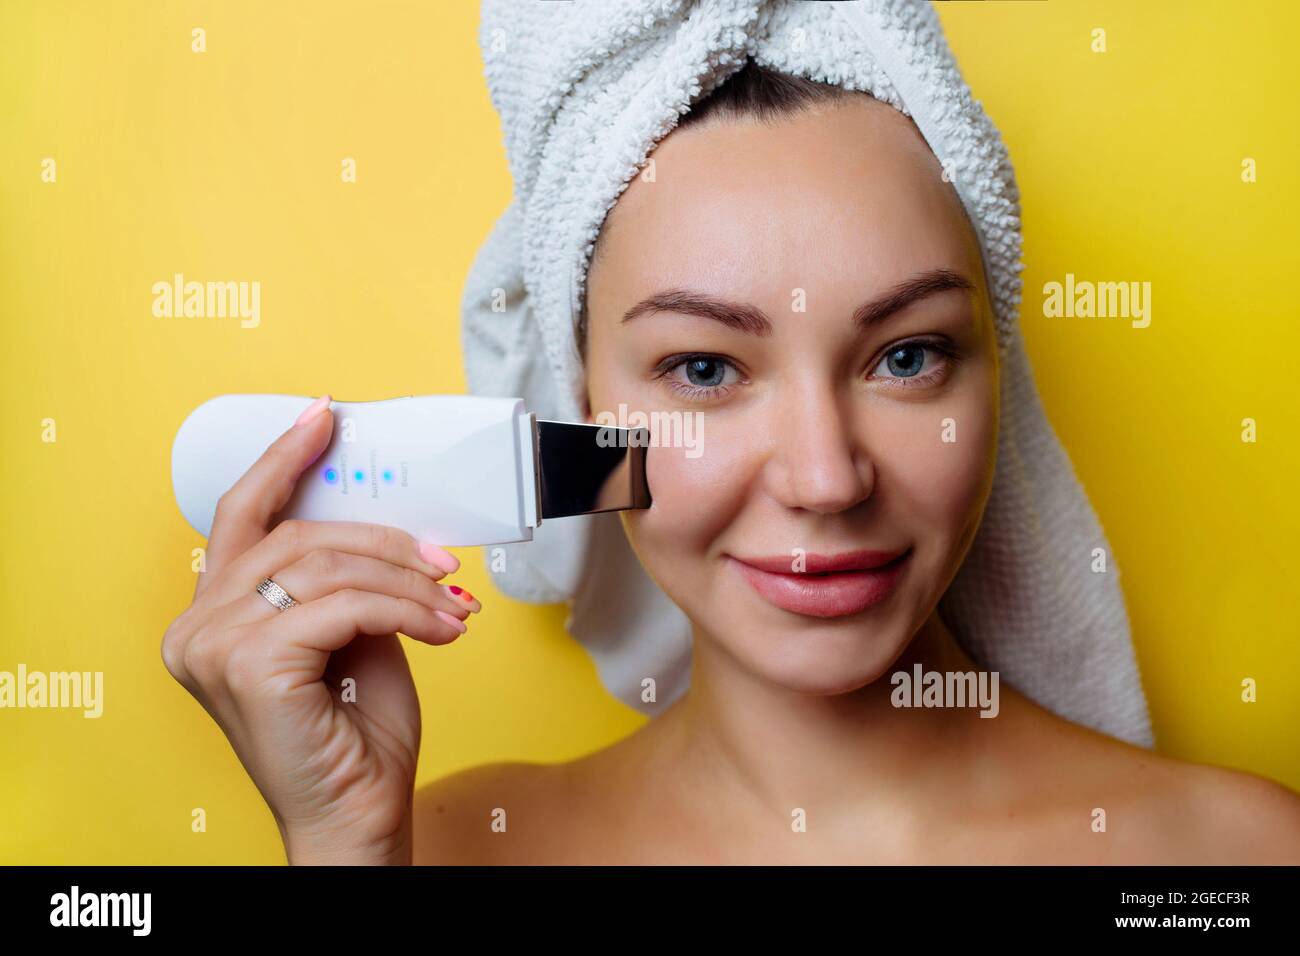 Ultrasonic Scrubber For Facial Skin Cleansing Girl In The Bathroom